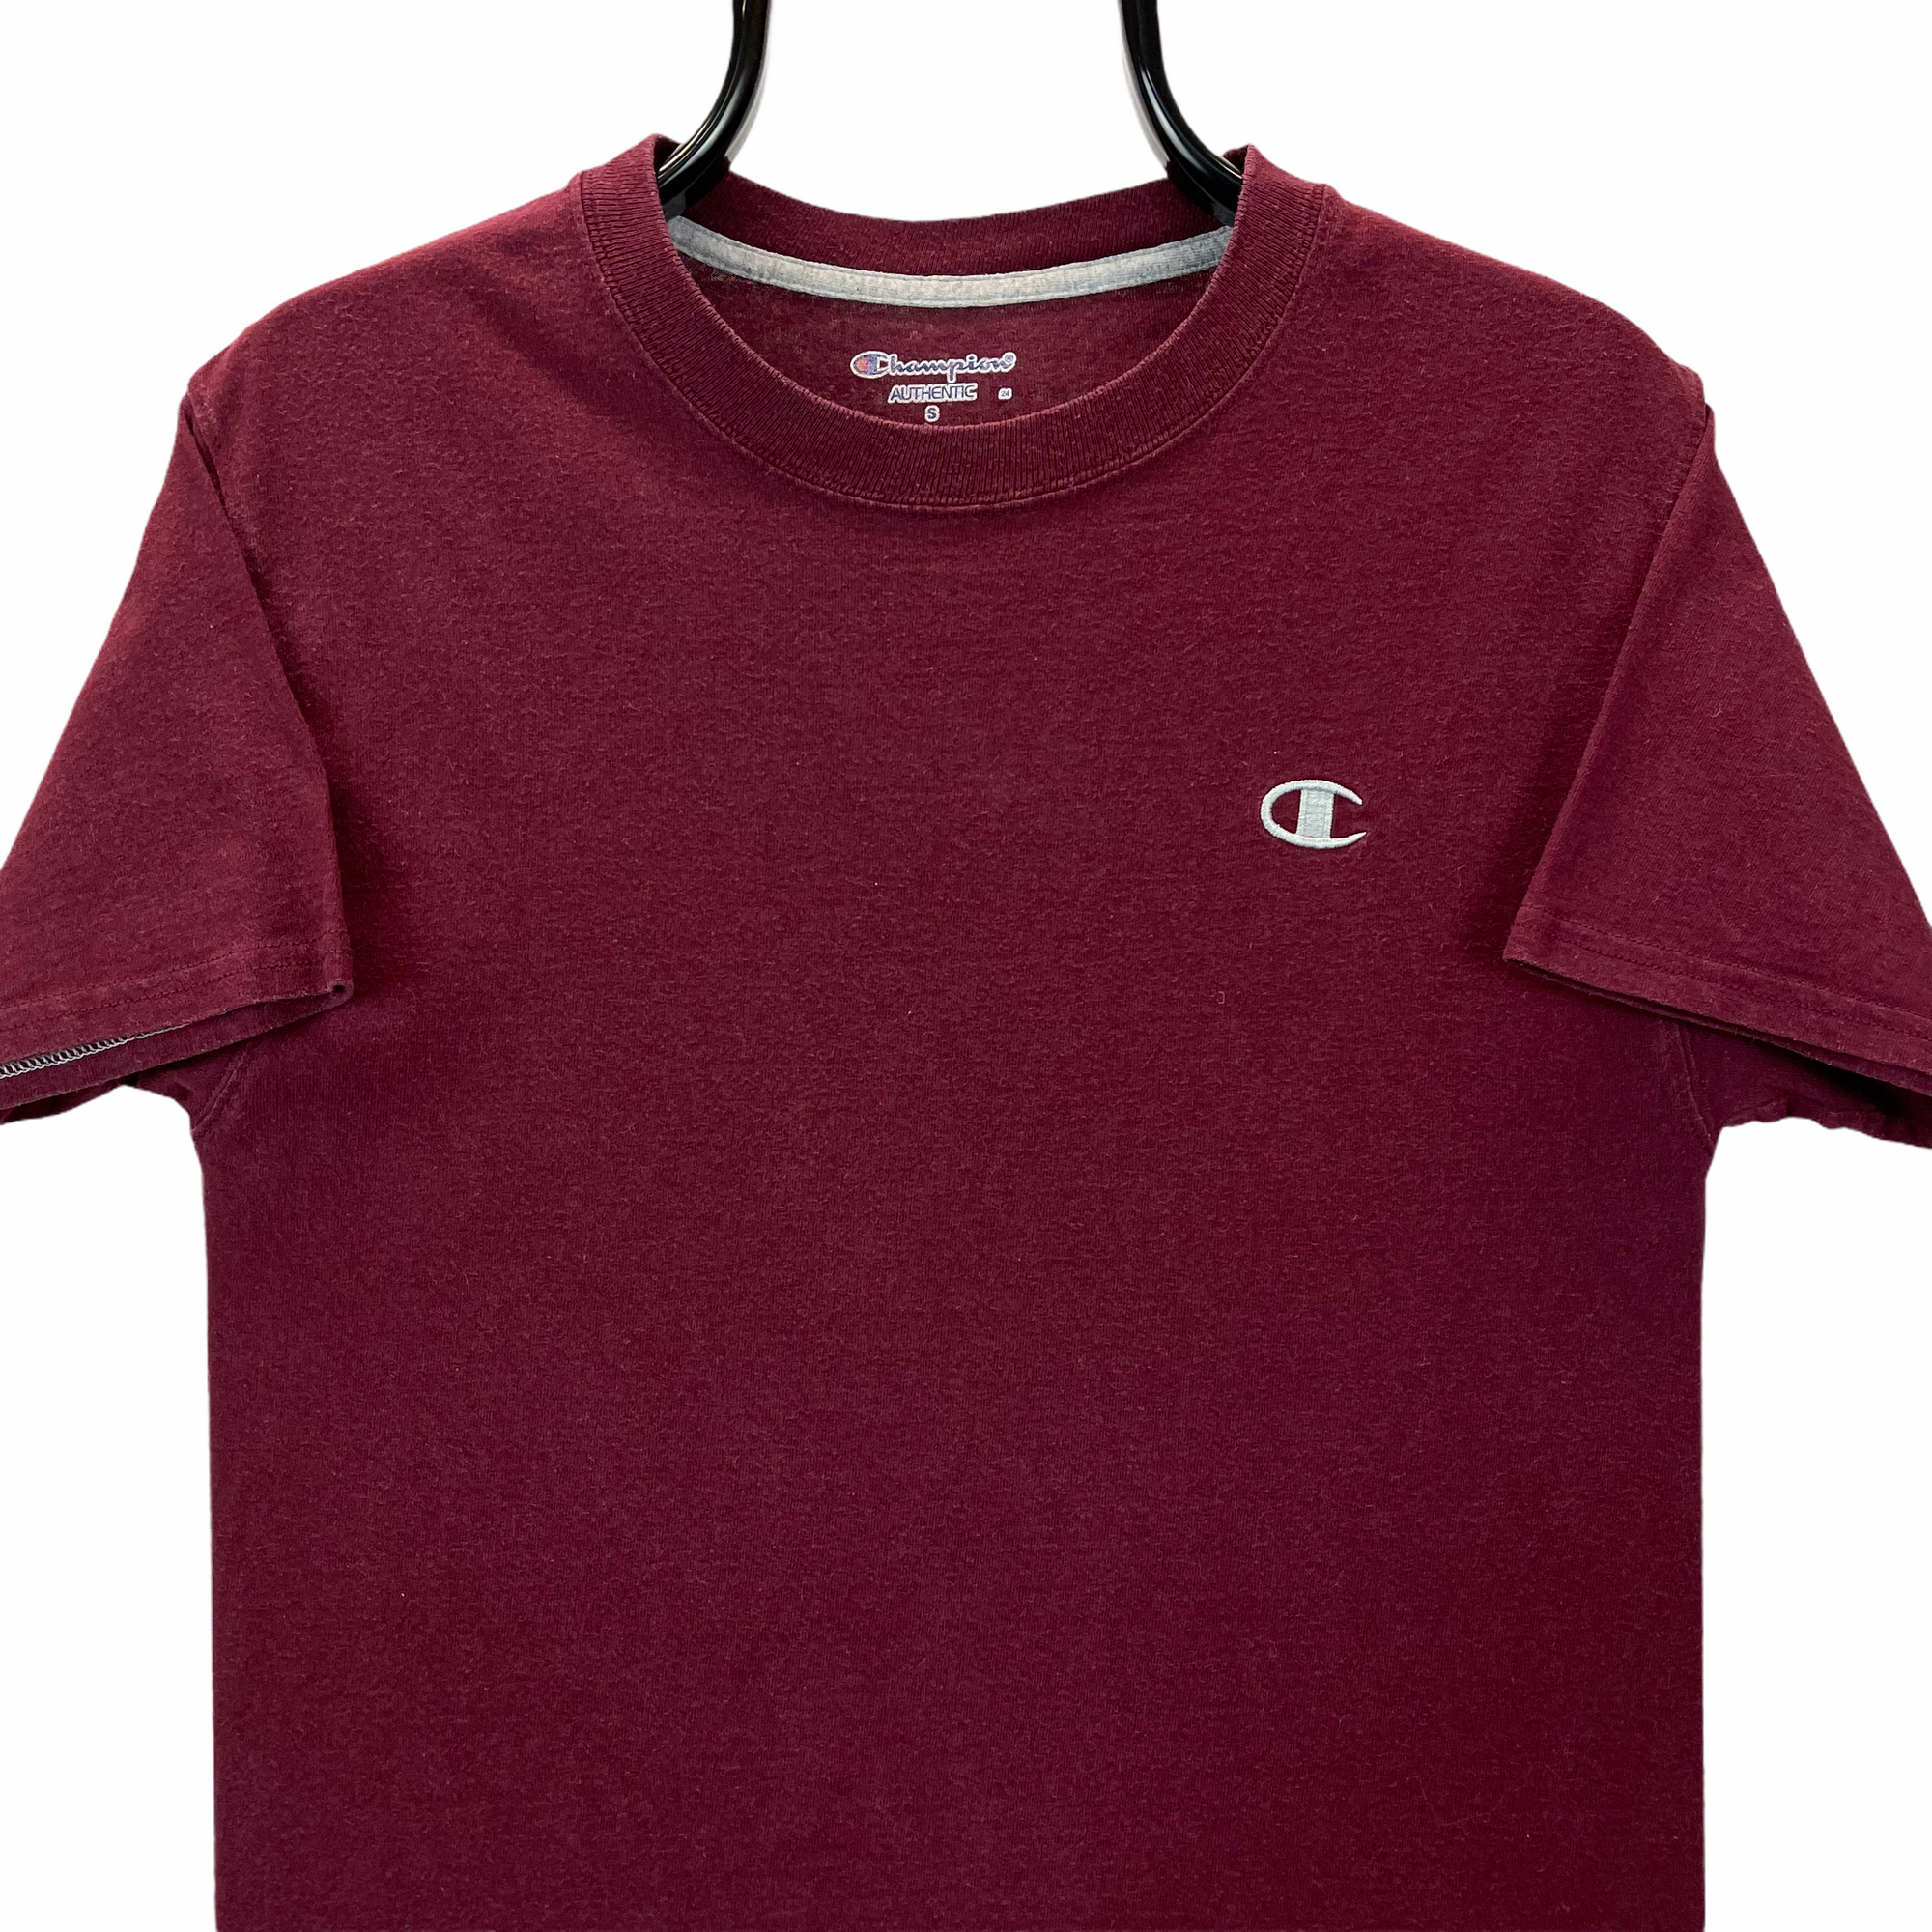 VINTAGE CHAMPION EMBROIDERED SMALL LOGO TEE IN MAROON - MEN'S SMALL/WOMEN'S MEDIUM